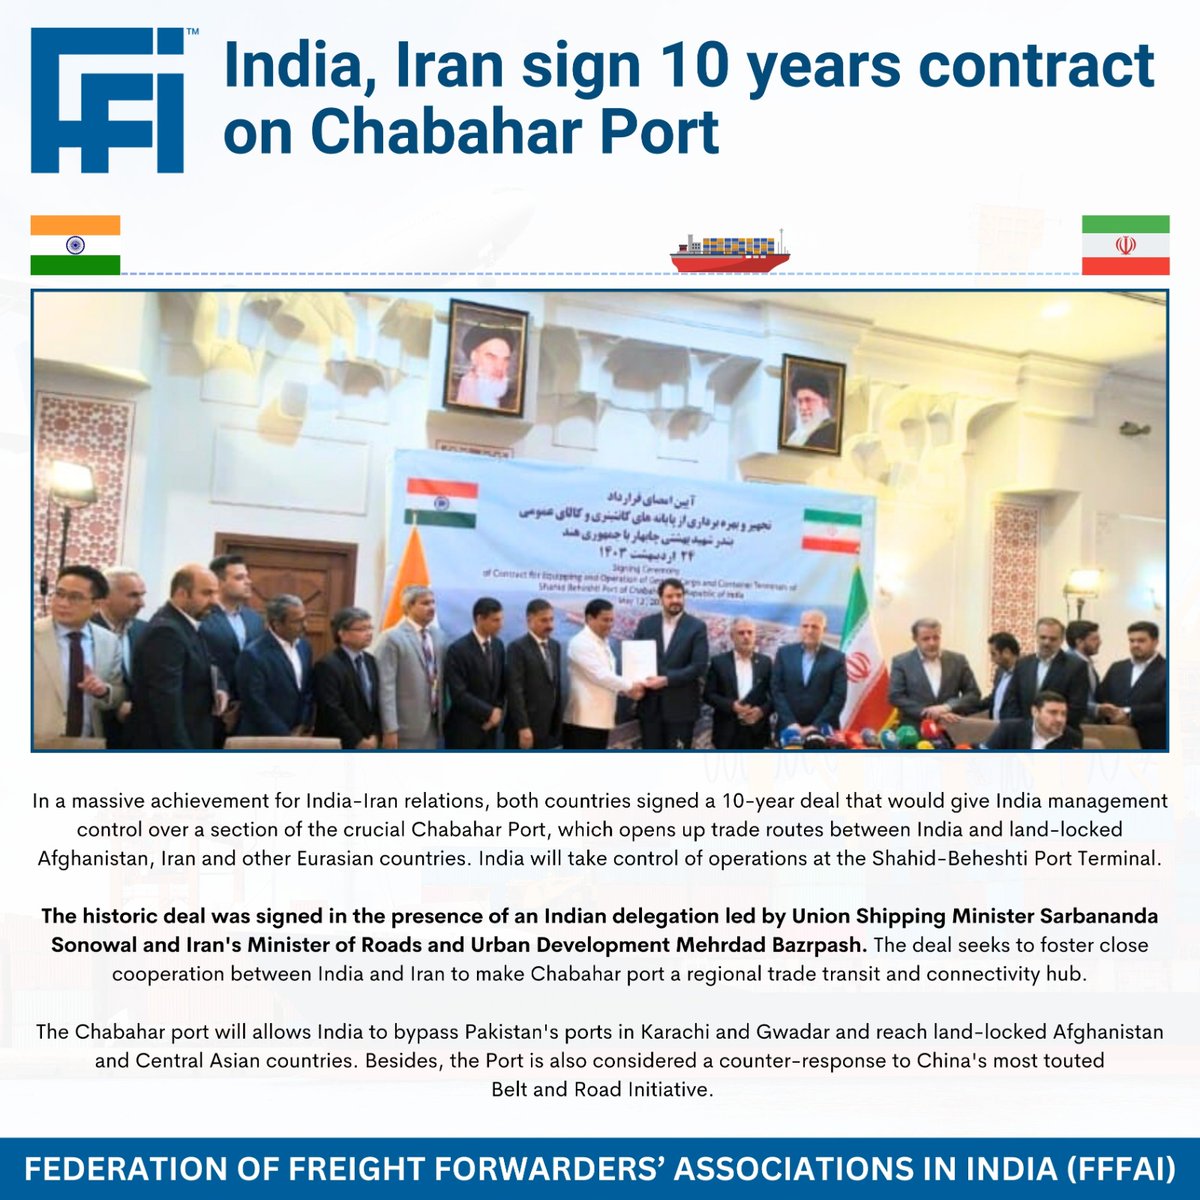 #India, #Iran sign 10 years contract on #ChabaharPort 
In a massive achievement for India-Iran relations, both countries signed a 10-year deal that would give India management control over a section of the crucial Chabahar Port,
@shipmin_india @sarbanandsonwal
#bilateraltrade